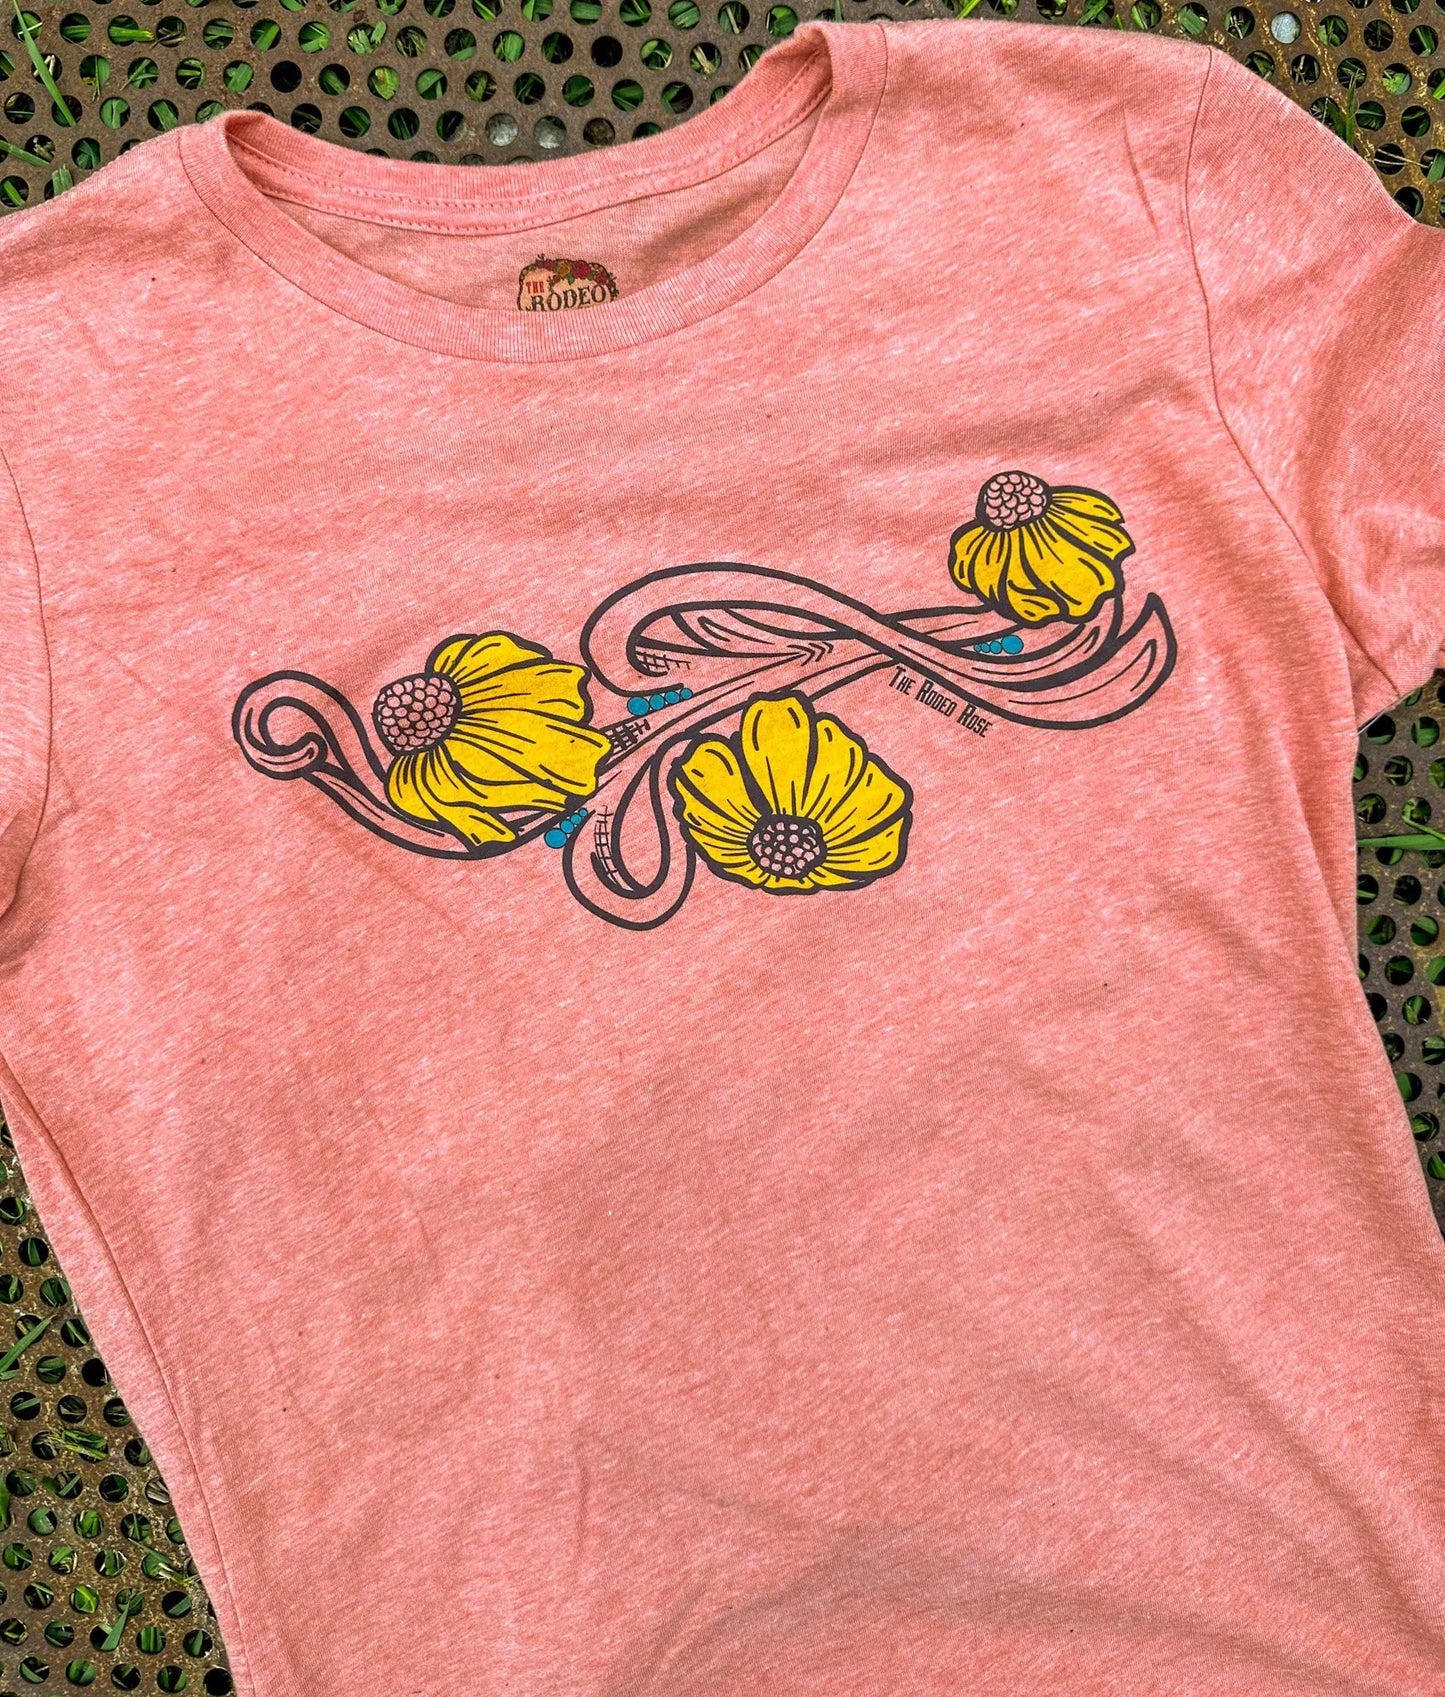 Coneflower tshirt in sunset pink The Rodeo Rose